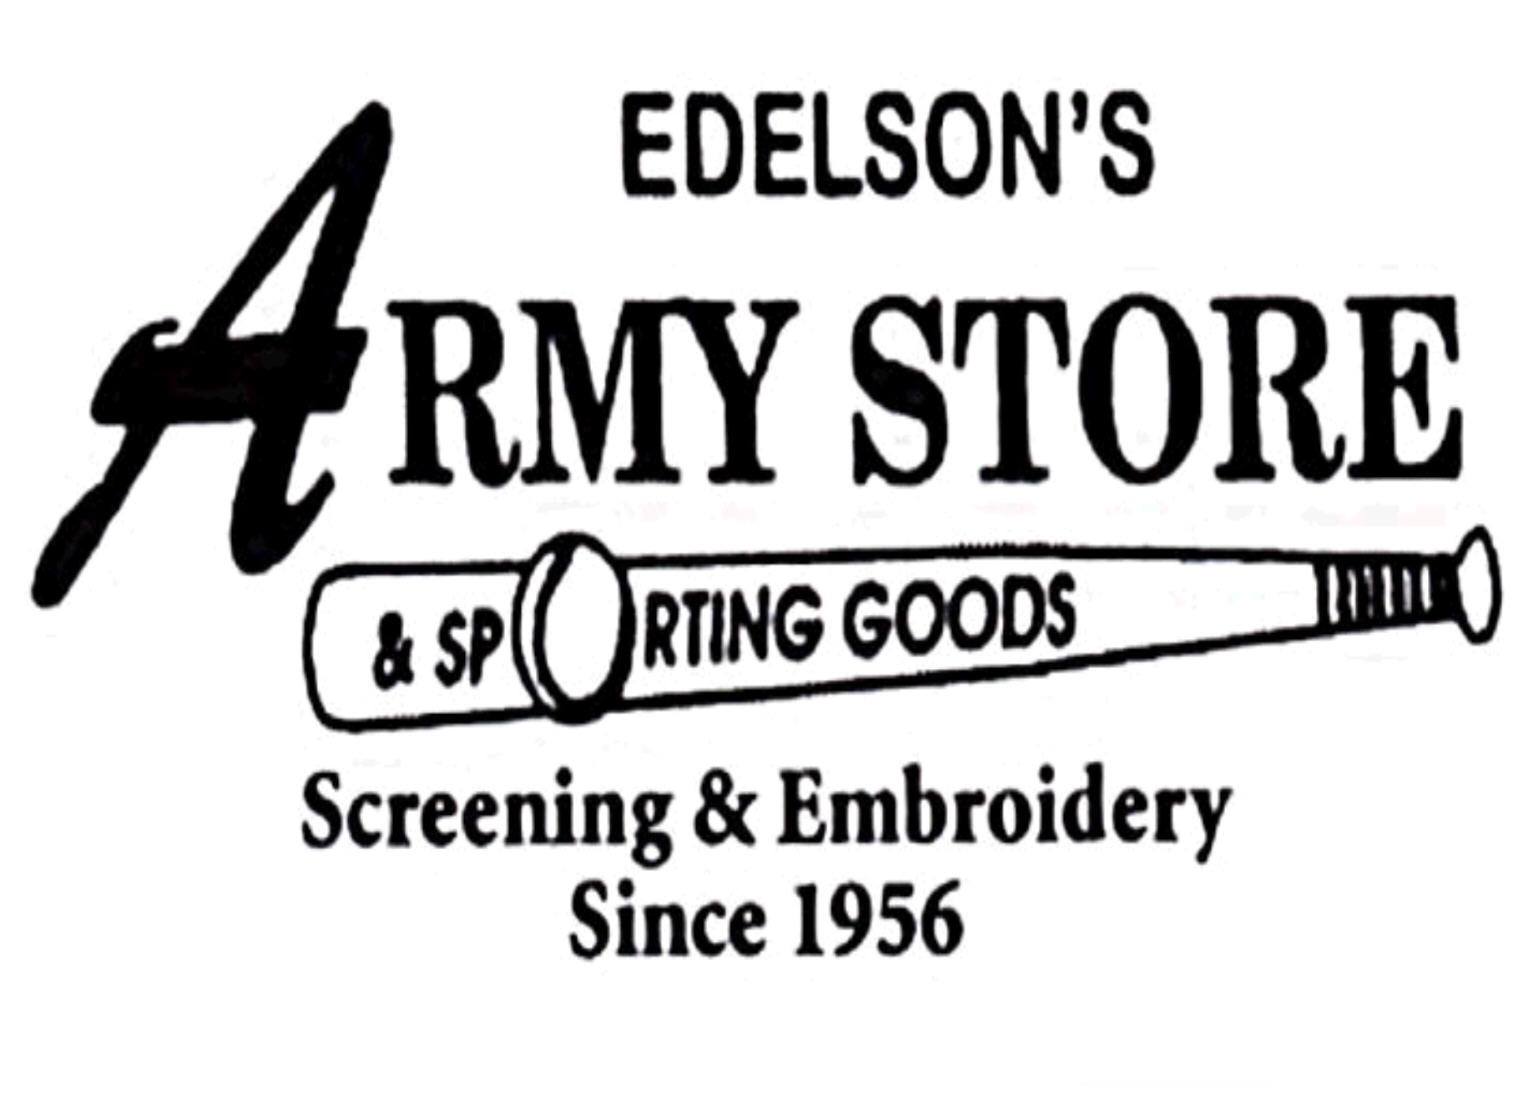 Edelson's Army Store